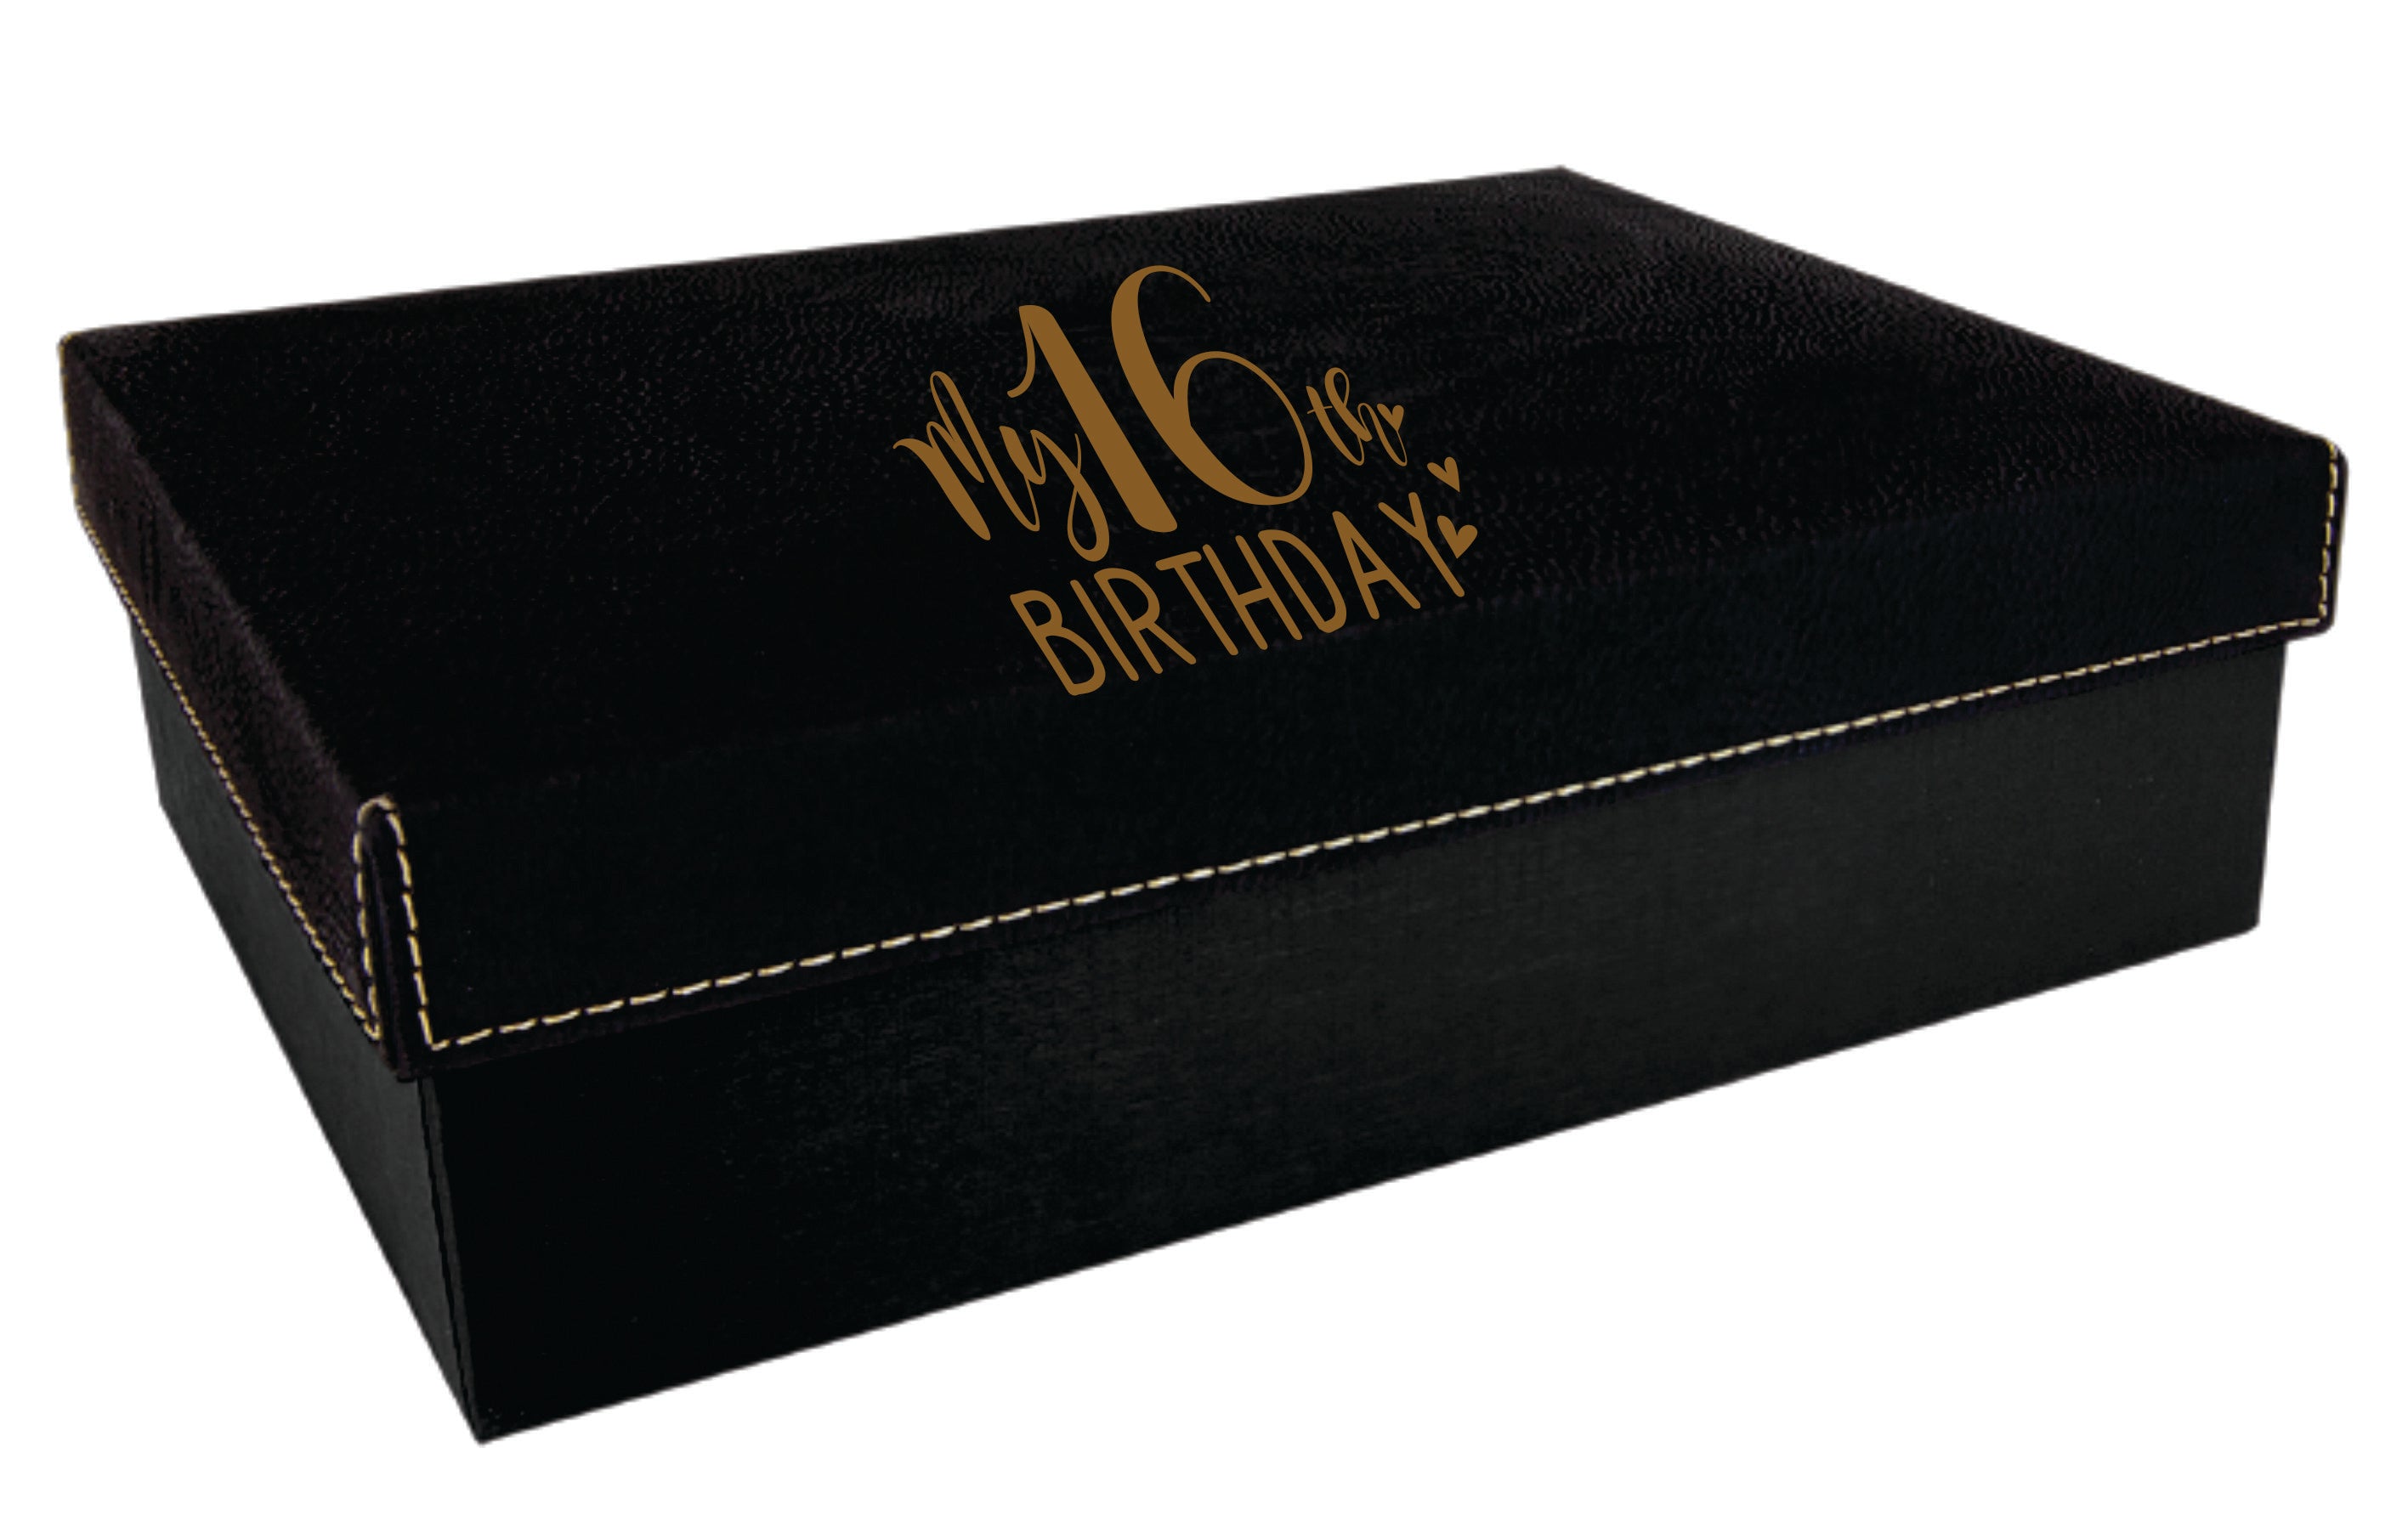 9 3/4" x 7" Black/Gold Gift Box with Laserable Leatherette Lid